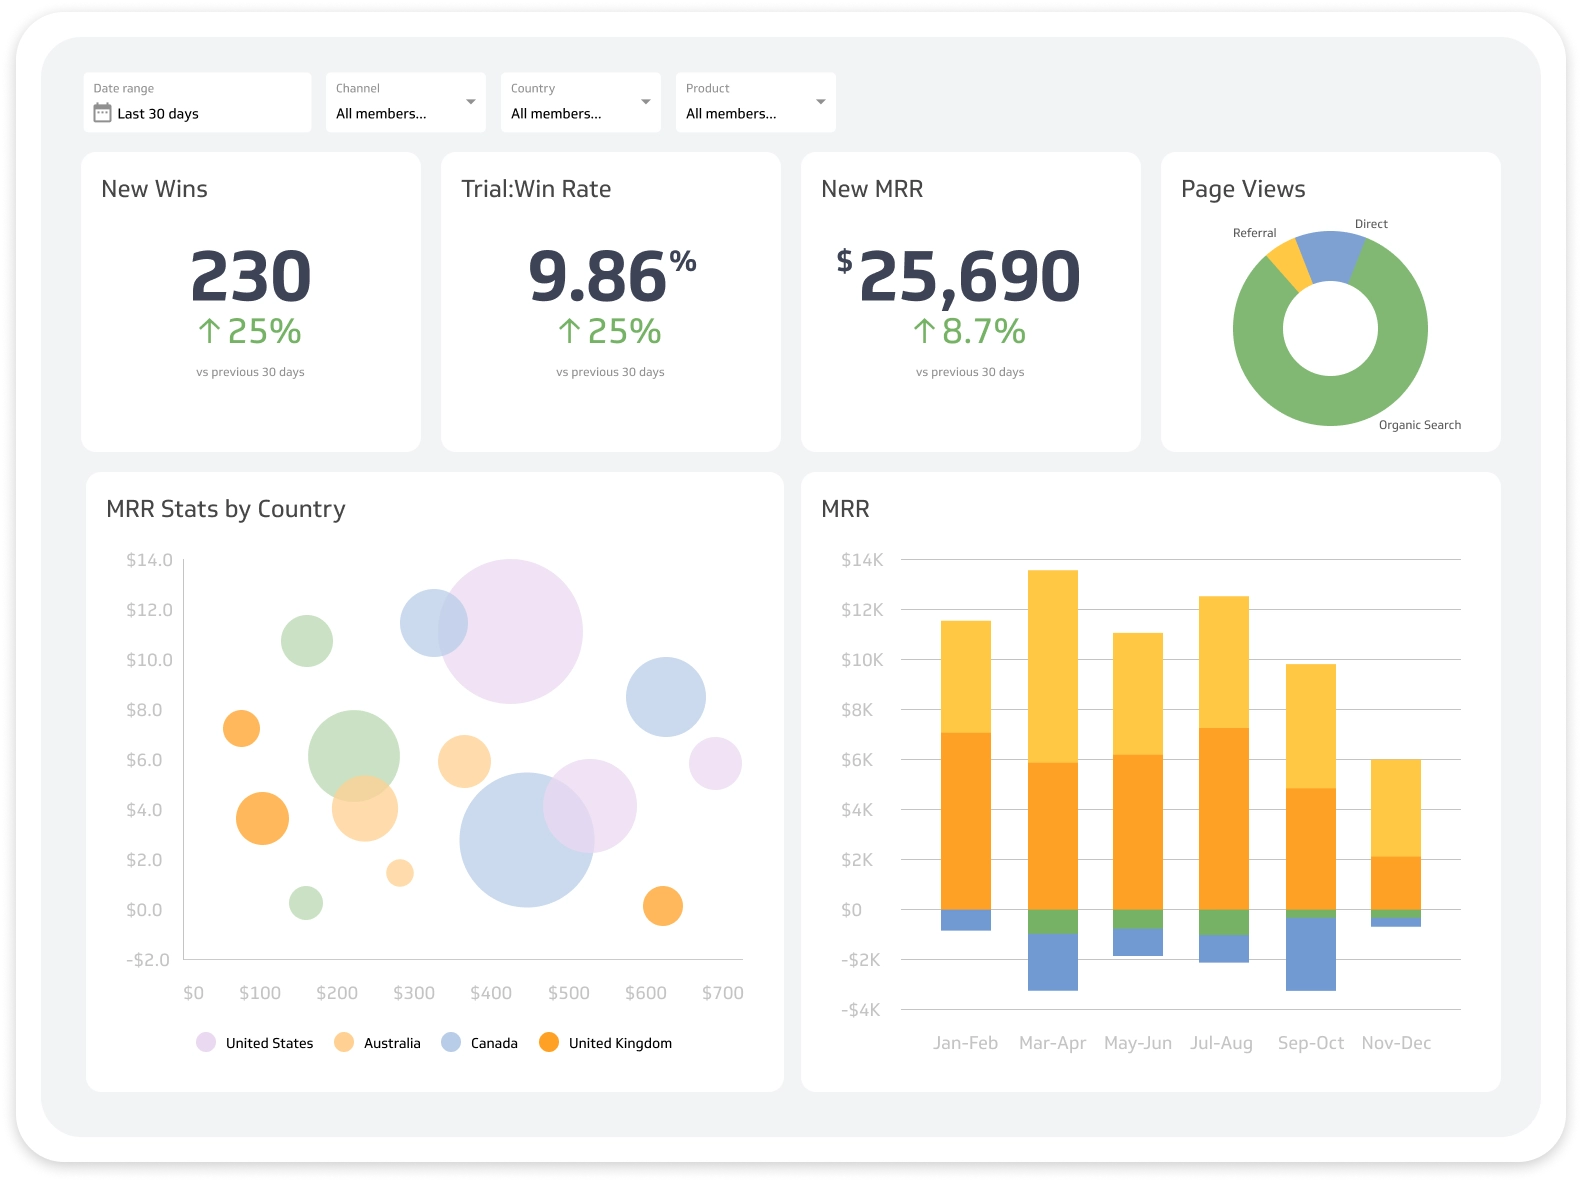 Klipfolio Software - Connect to the data sources you use every day and create dashboards everyone will love with Klipfolio PowerMetrics.